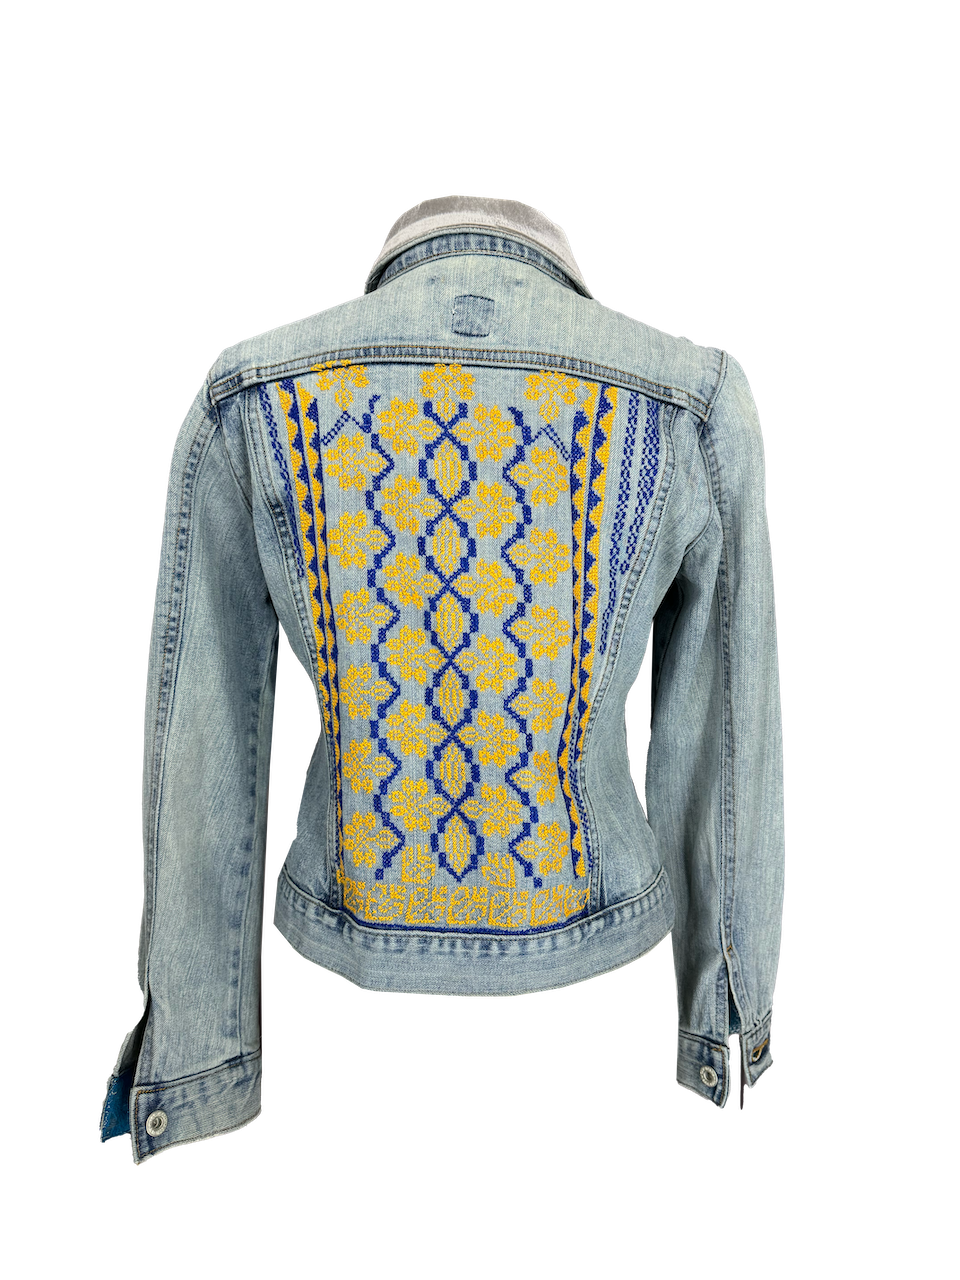 The Embroidered Denim Jacket in Navy Blue and Yellow